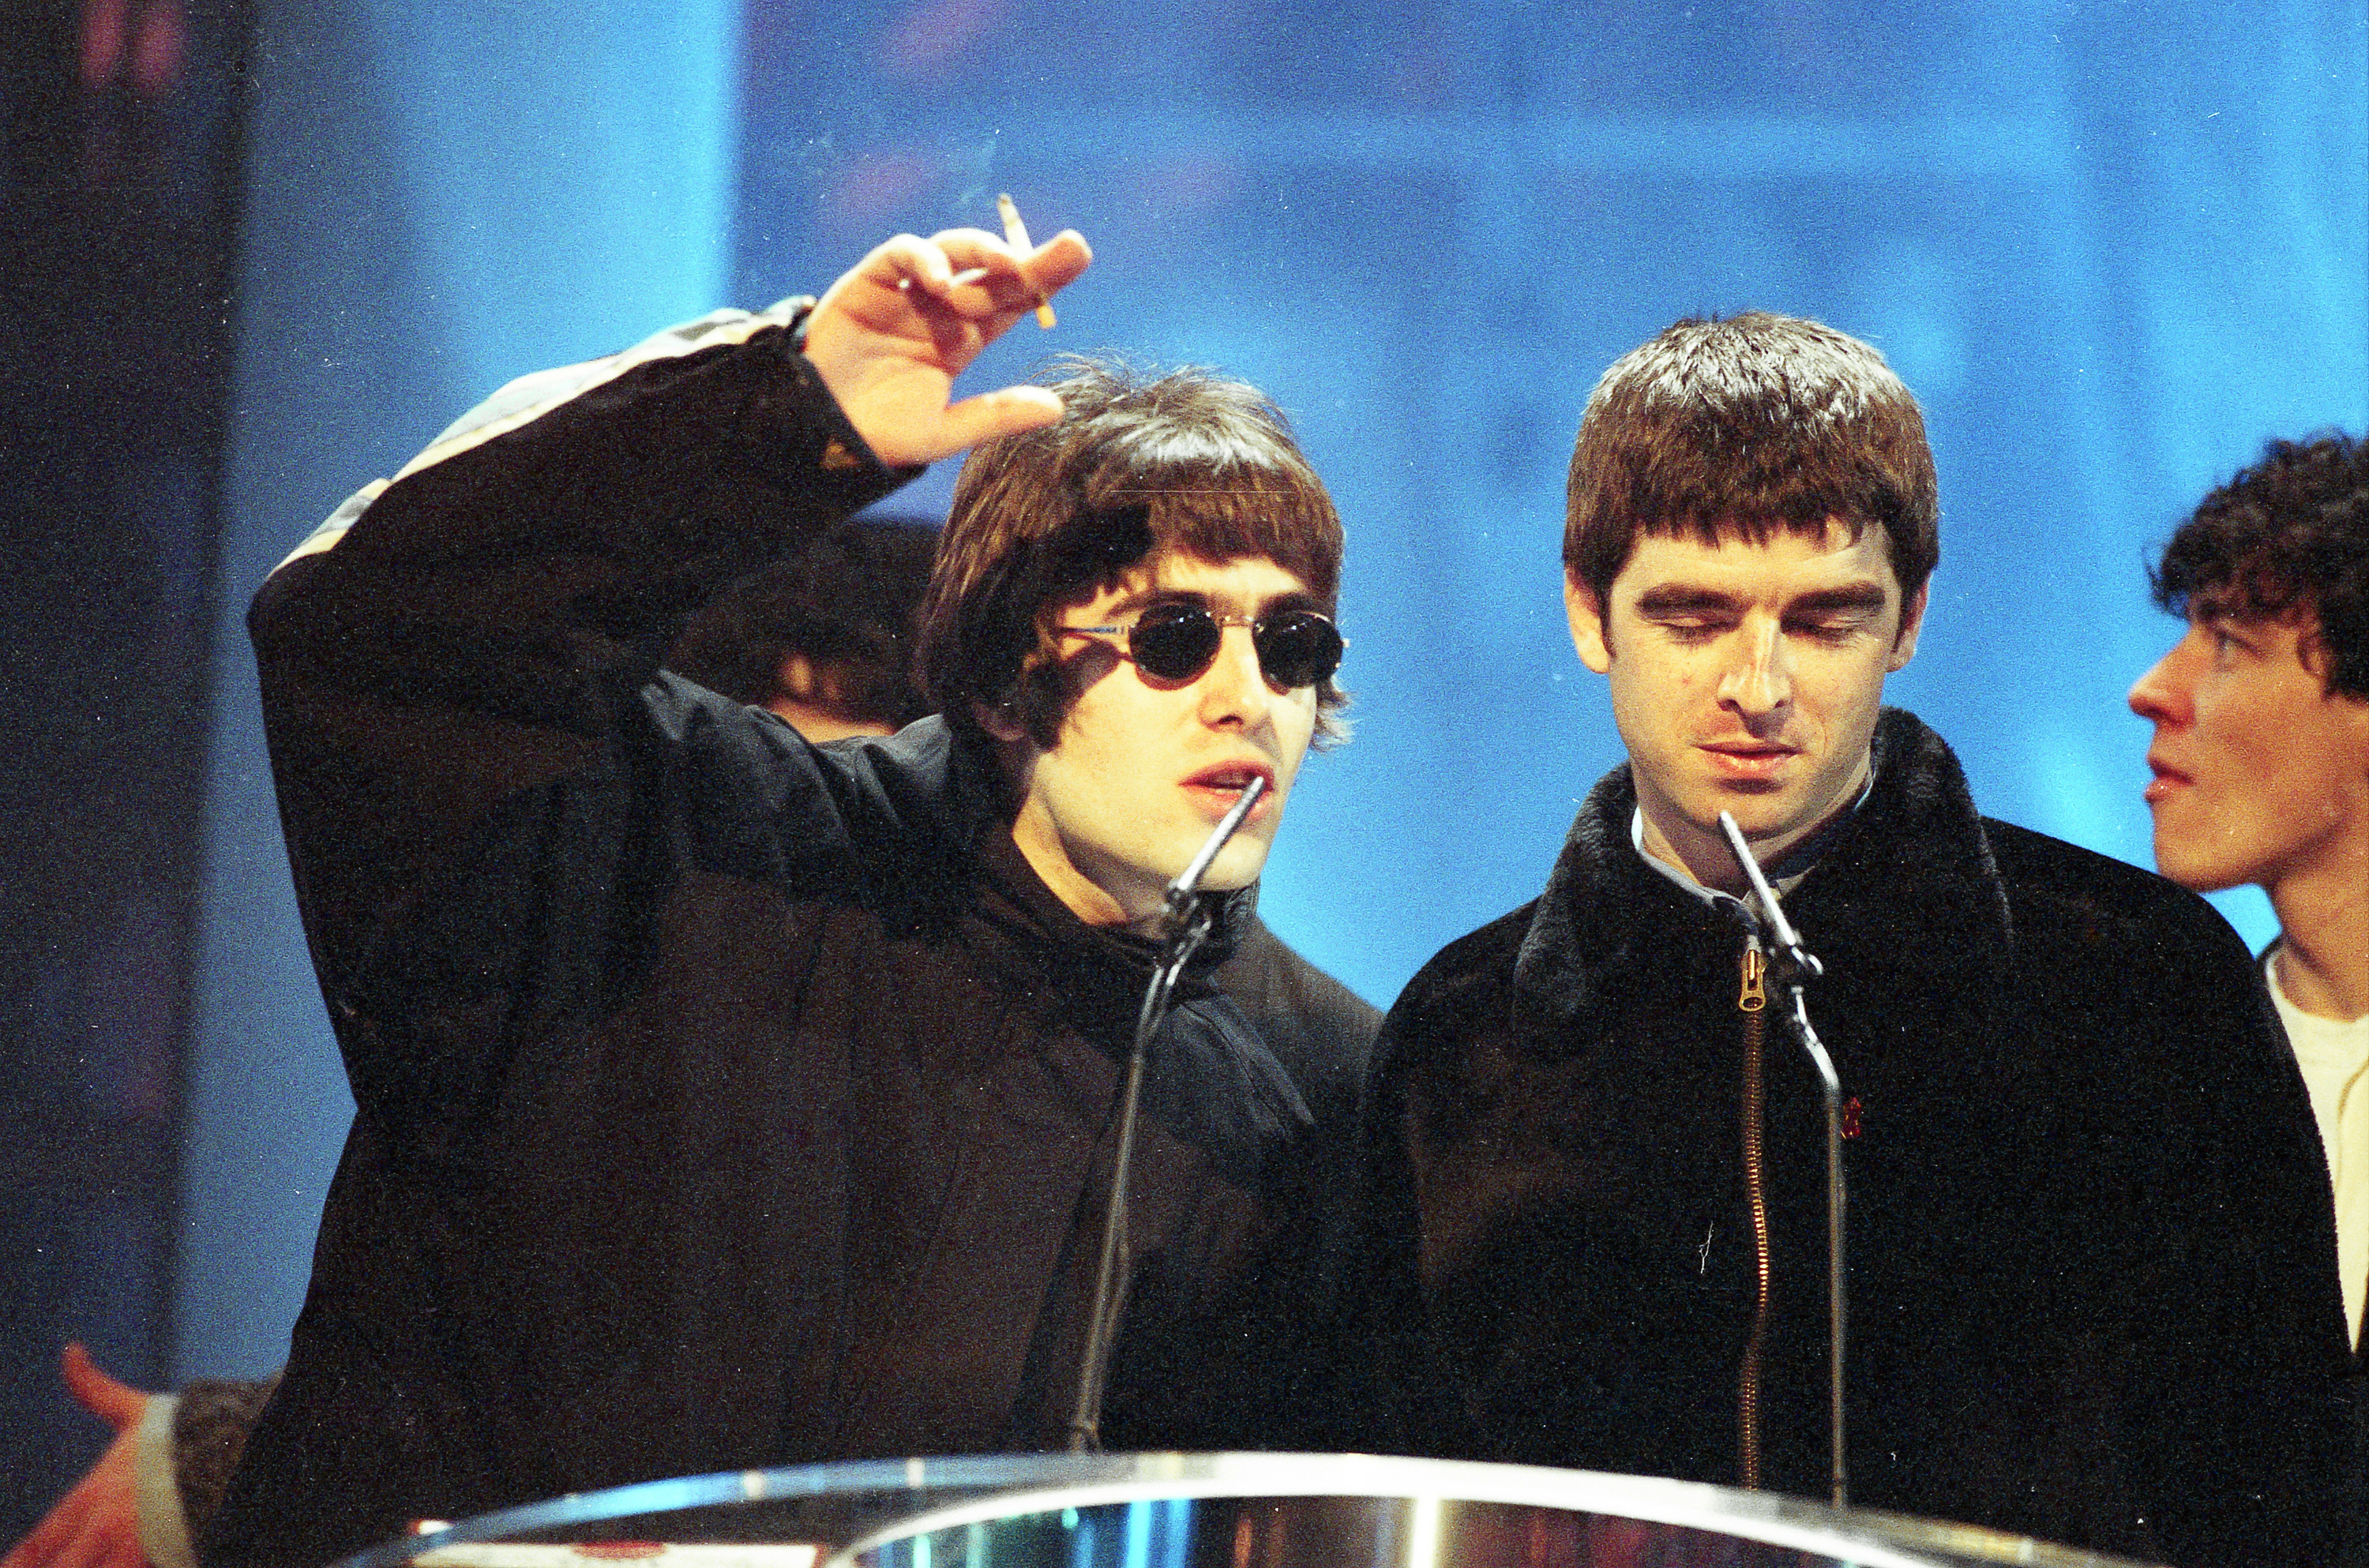 Oasis accepting an award on stage